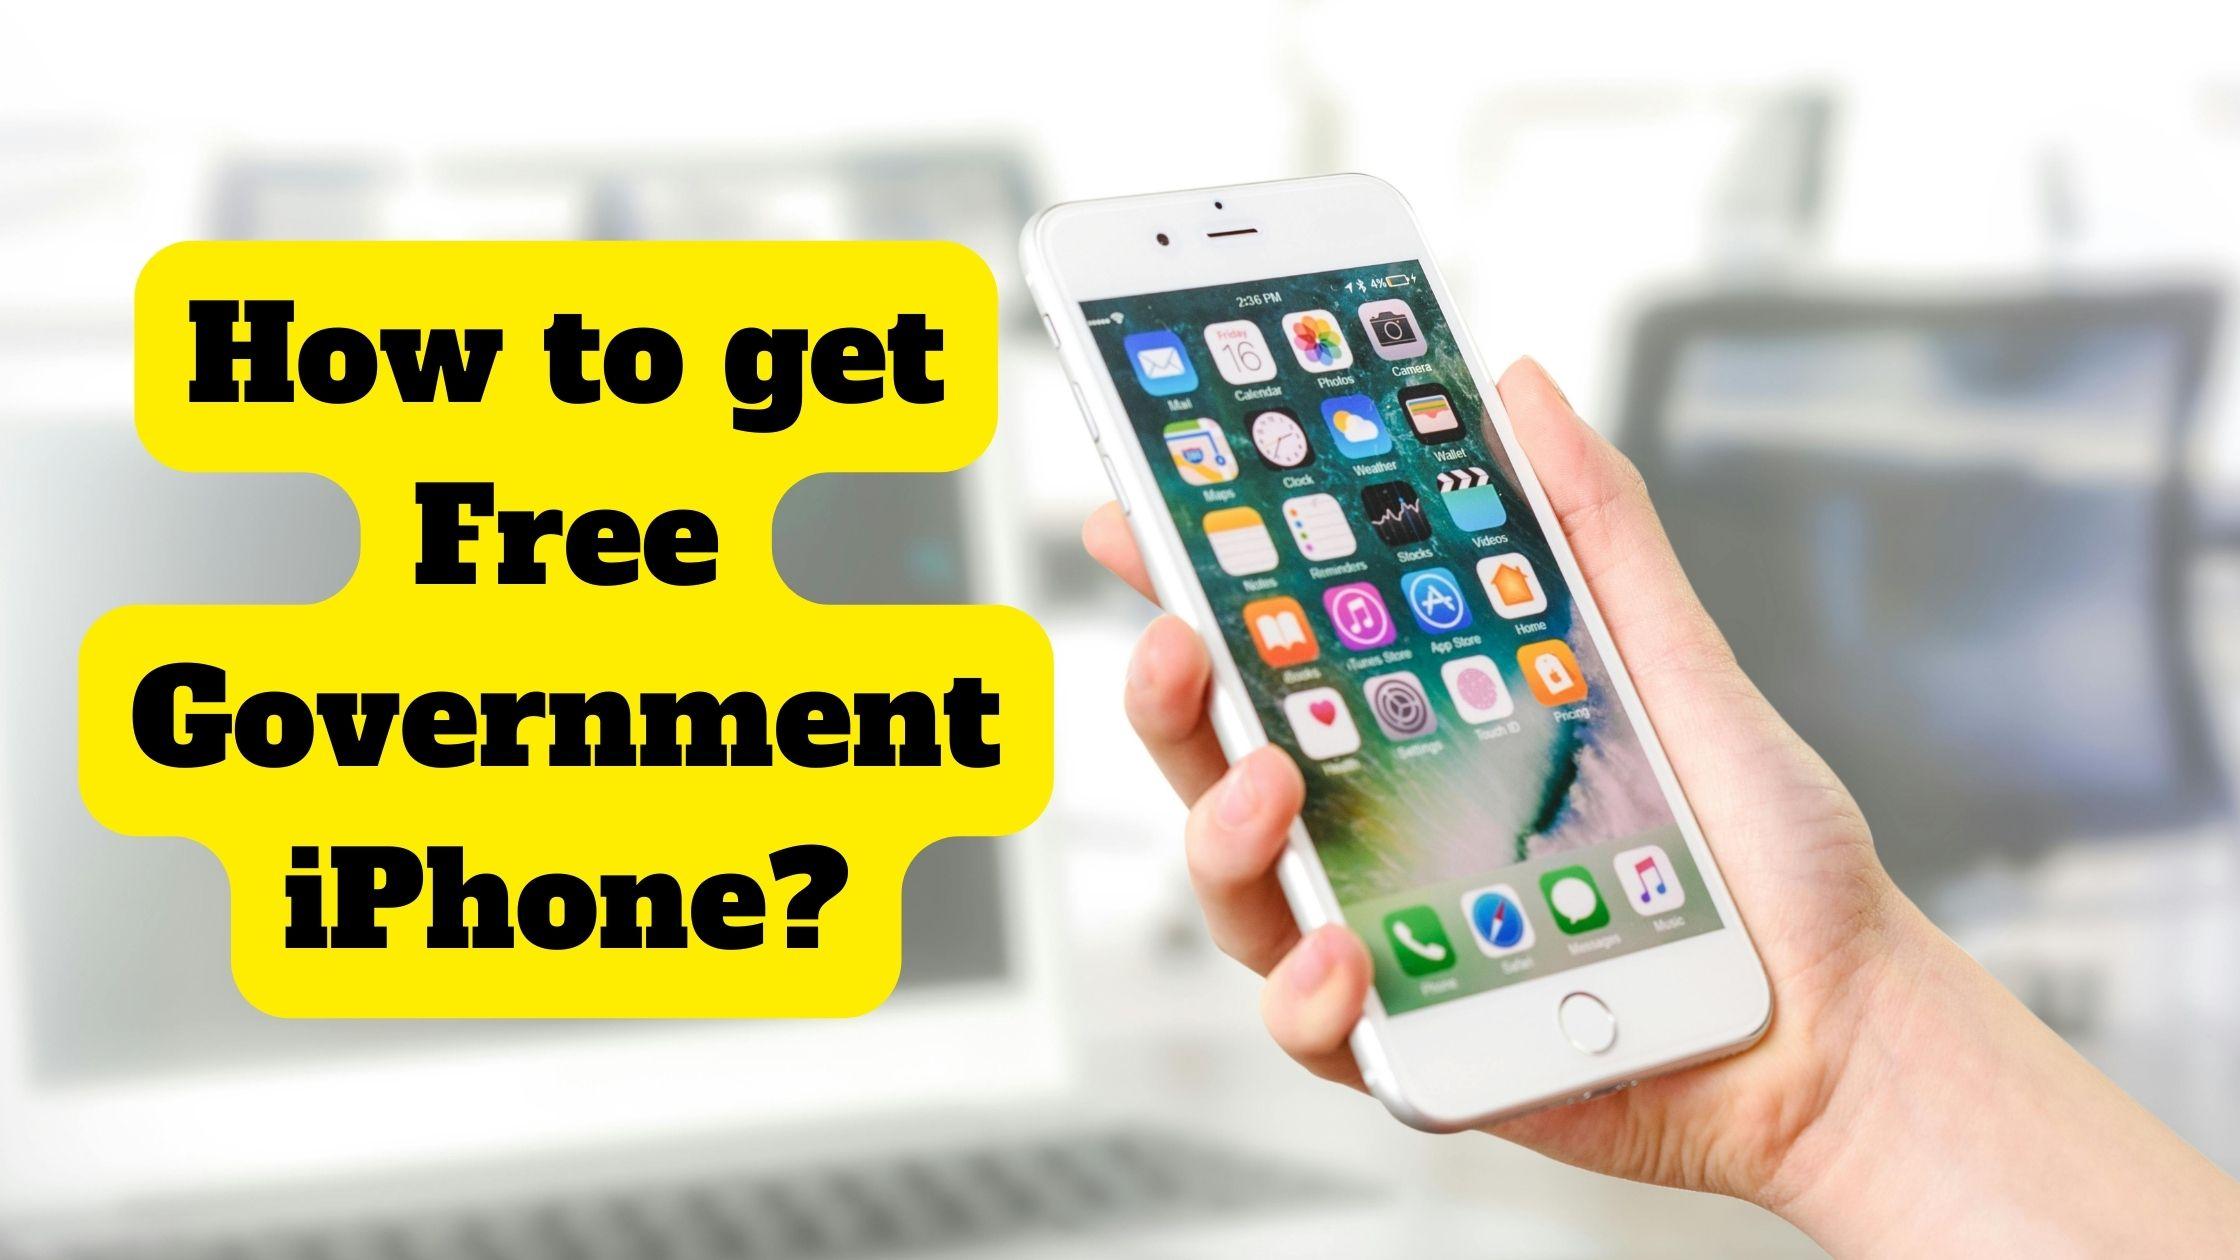 How to get Free Government iPhone